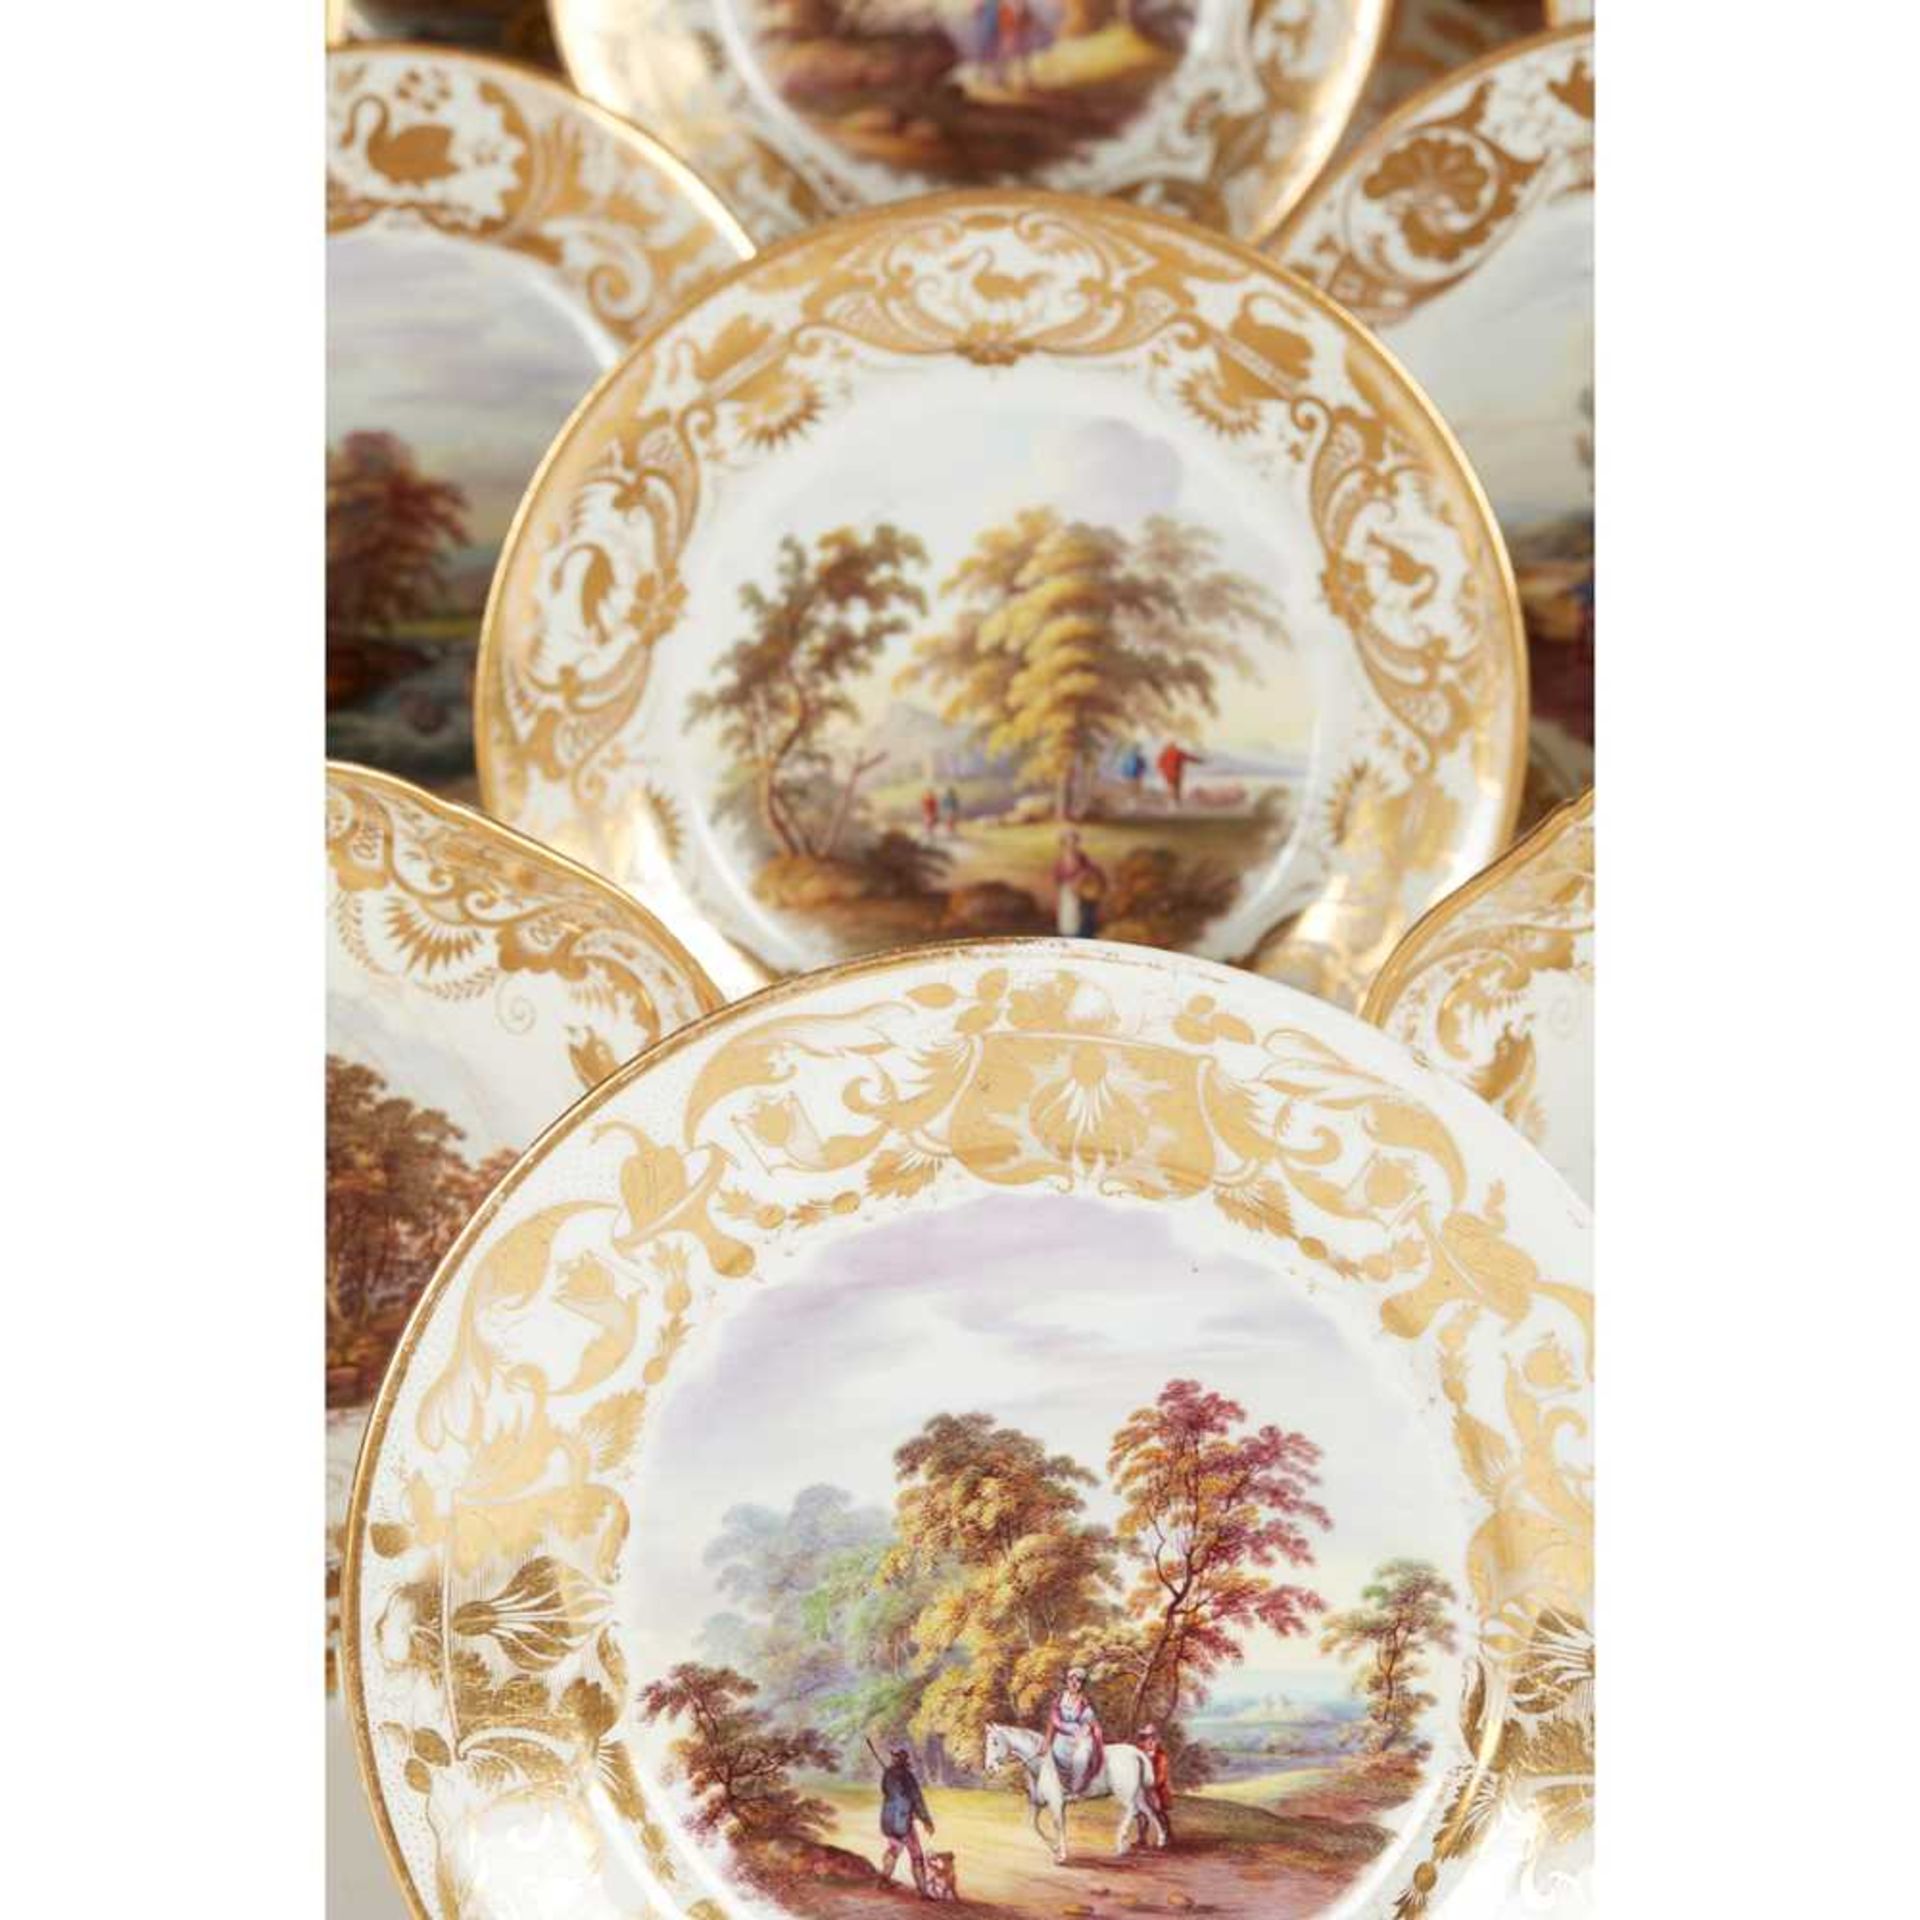 MATCHED DERBY PORCELAIN TOPOGRAPHICAL PART DESSERT SERVICE EARLY 19TH CENTURY - Image 5 of 8